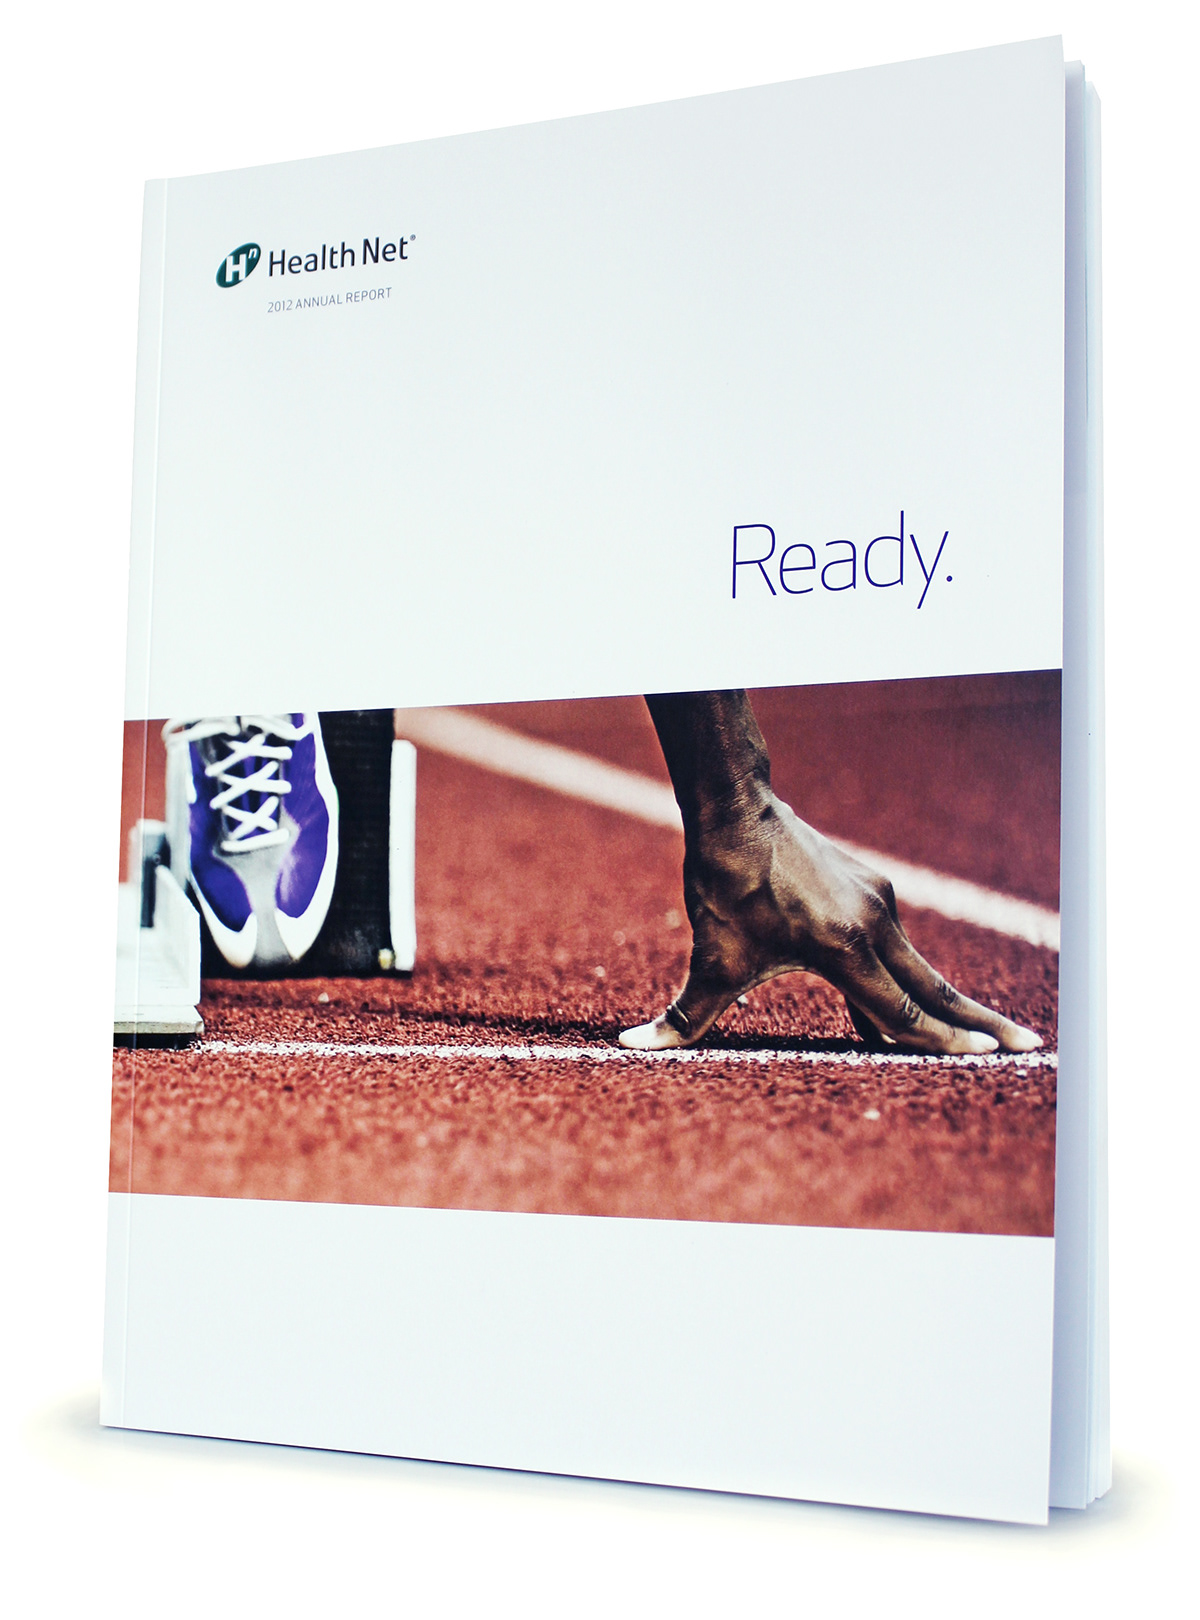 annual report Corporate Communication print collateral